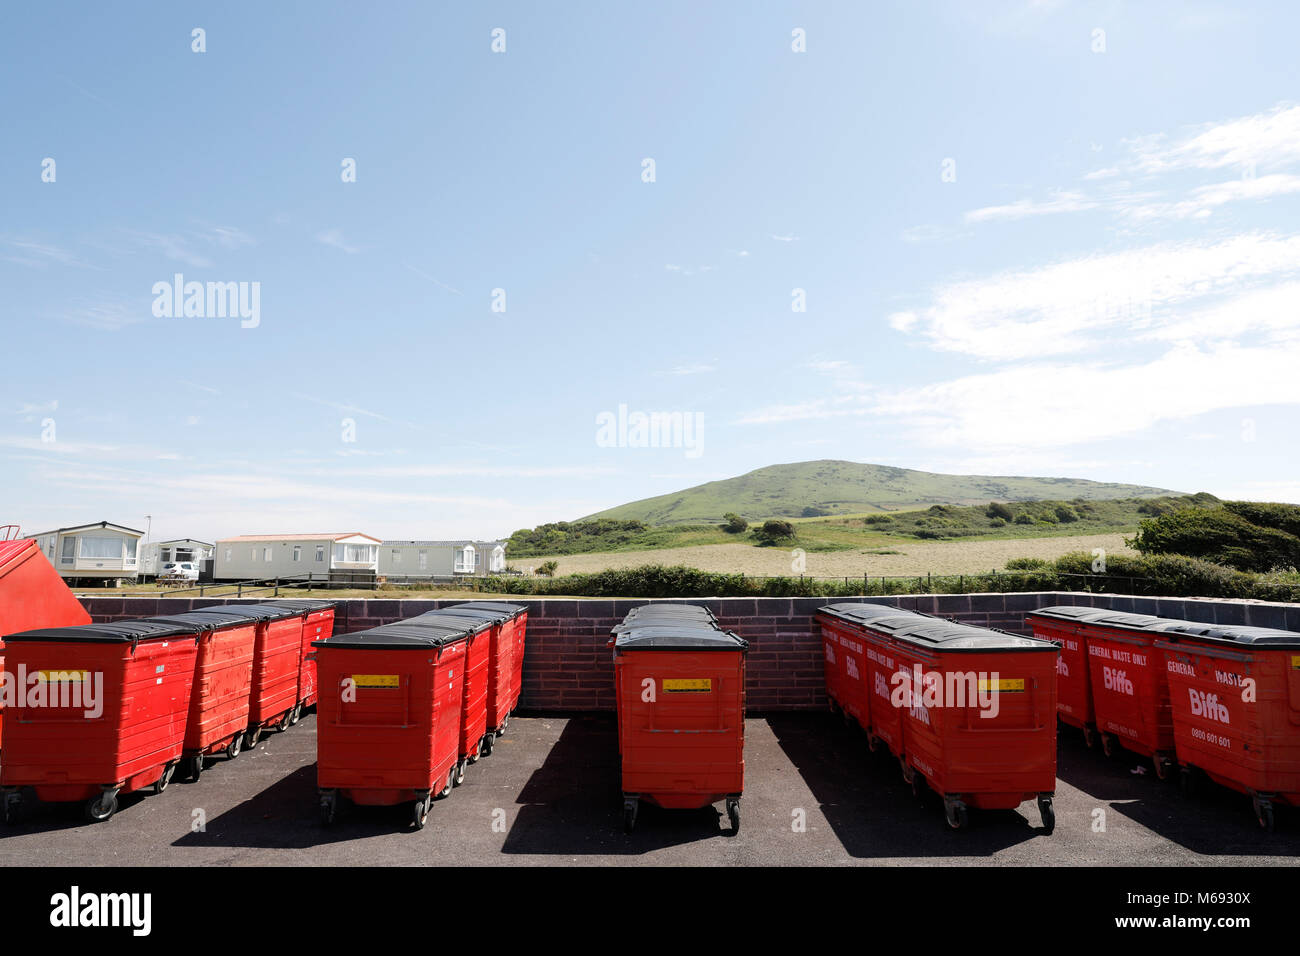 Swansea, UK. 6th Juy, 2017.  Red refuse collection skips, otherwise known as wheely bins, at Broughton Farm Caravan Park, Gower peninsula, Swansea. Stock Photo